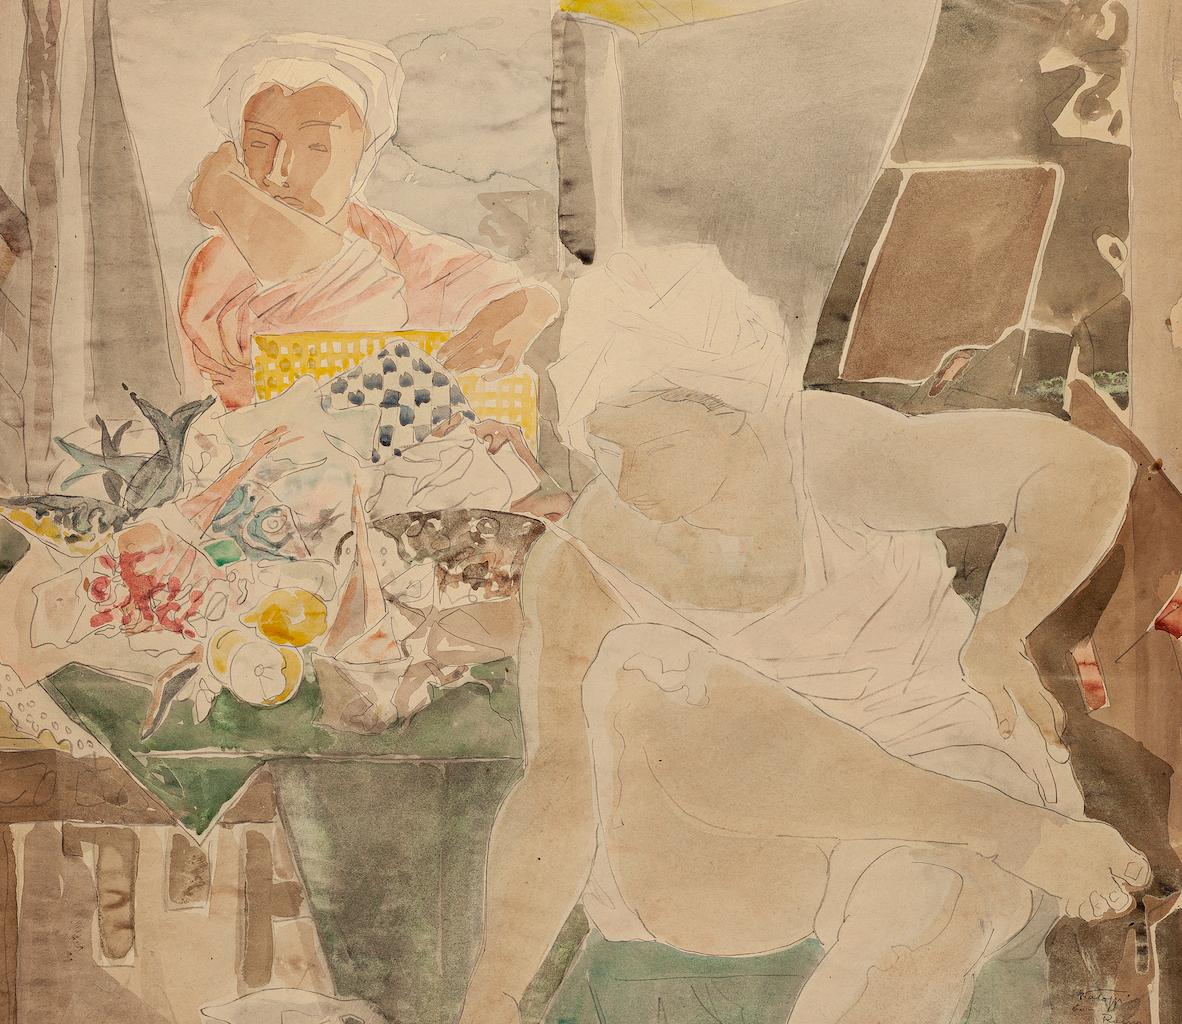 Women is an original drawing in mixed media on paper in 1960.

Hand-signed and dated on the lower right.

Conditions: aged and good except for some folding along the margins.

Here the artwork represents two women in harmonious colors. The artwork